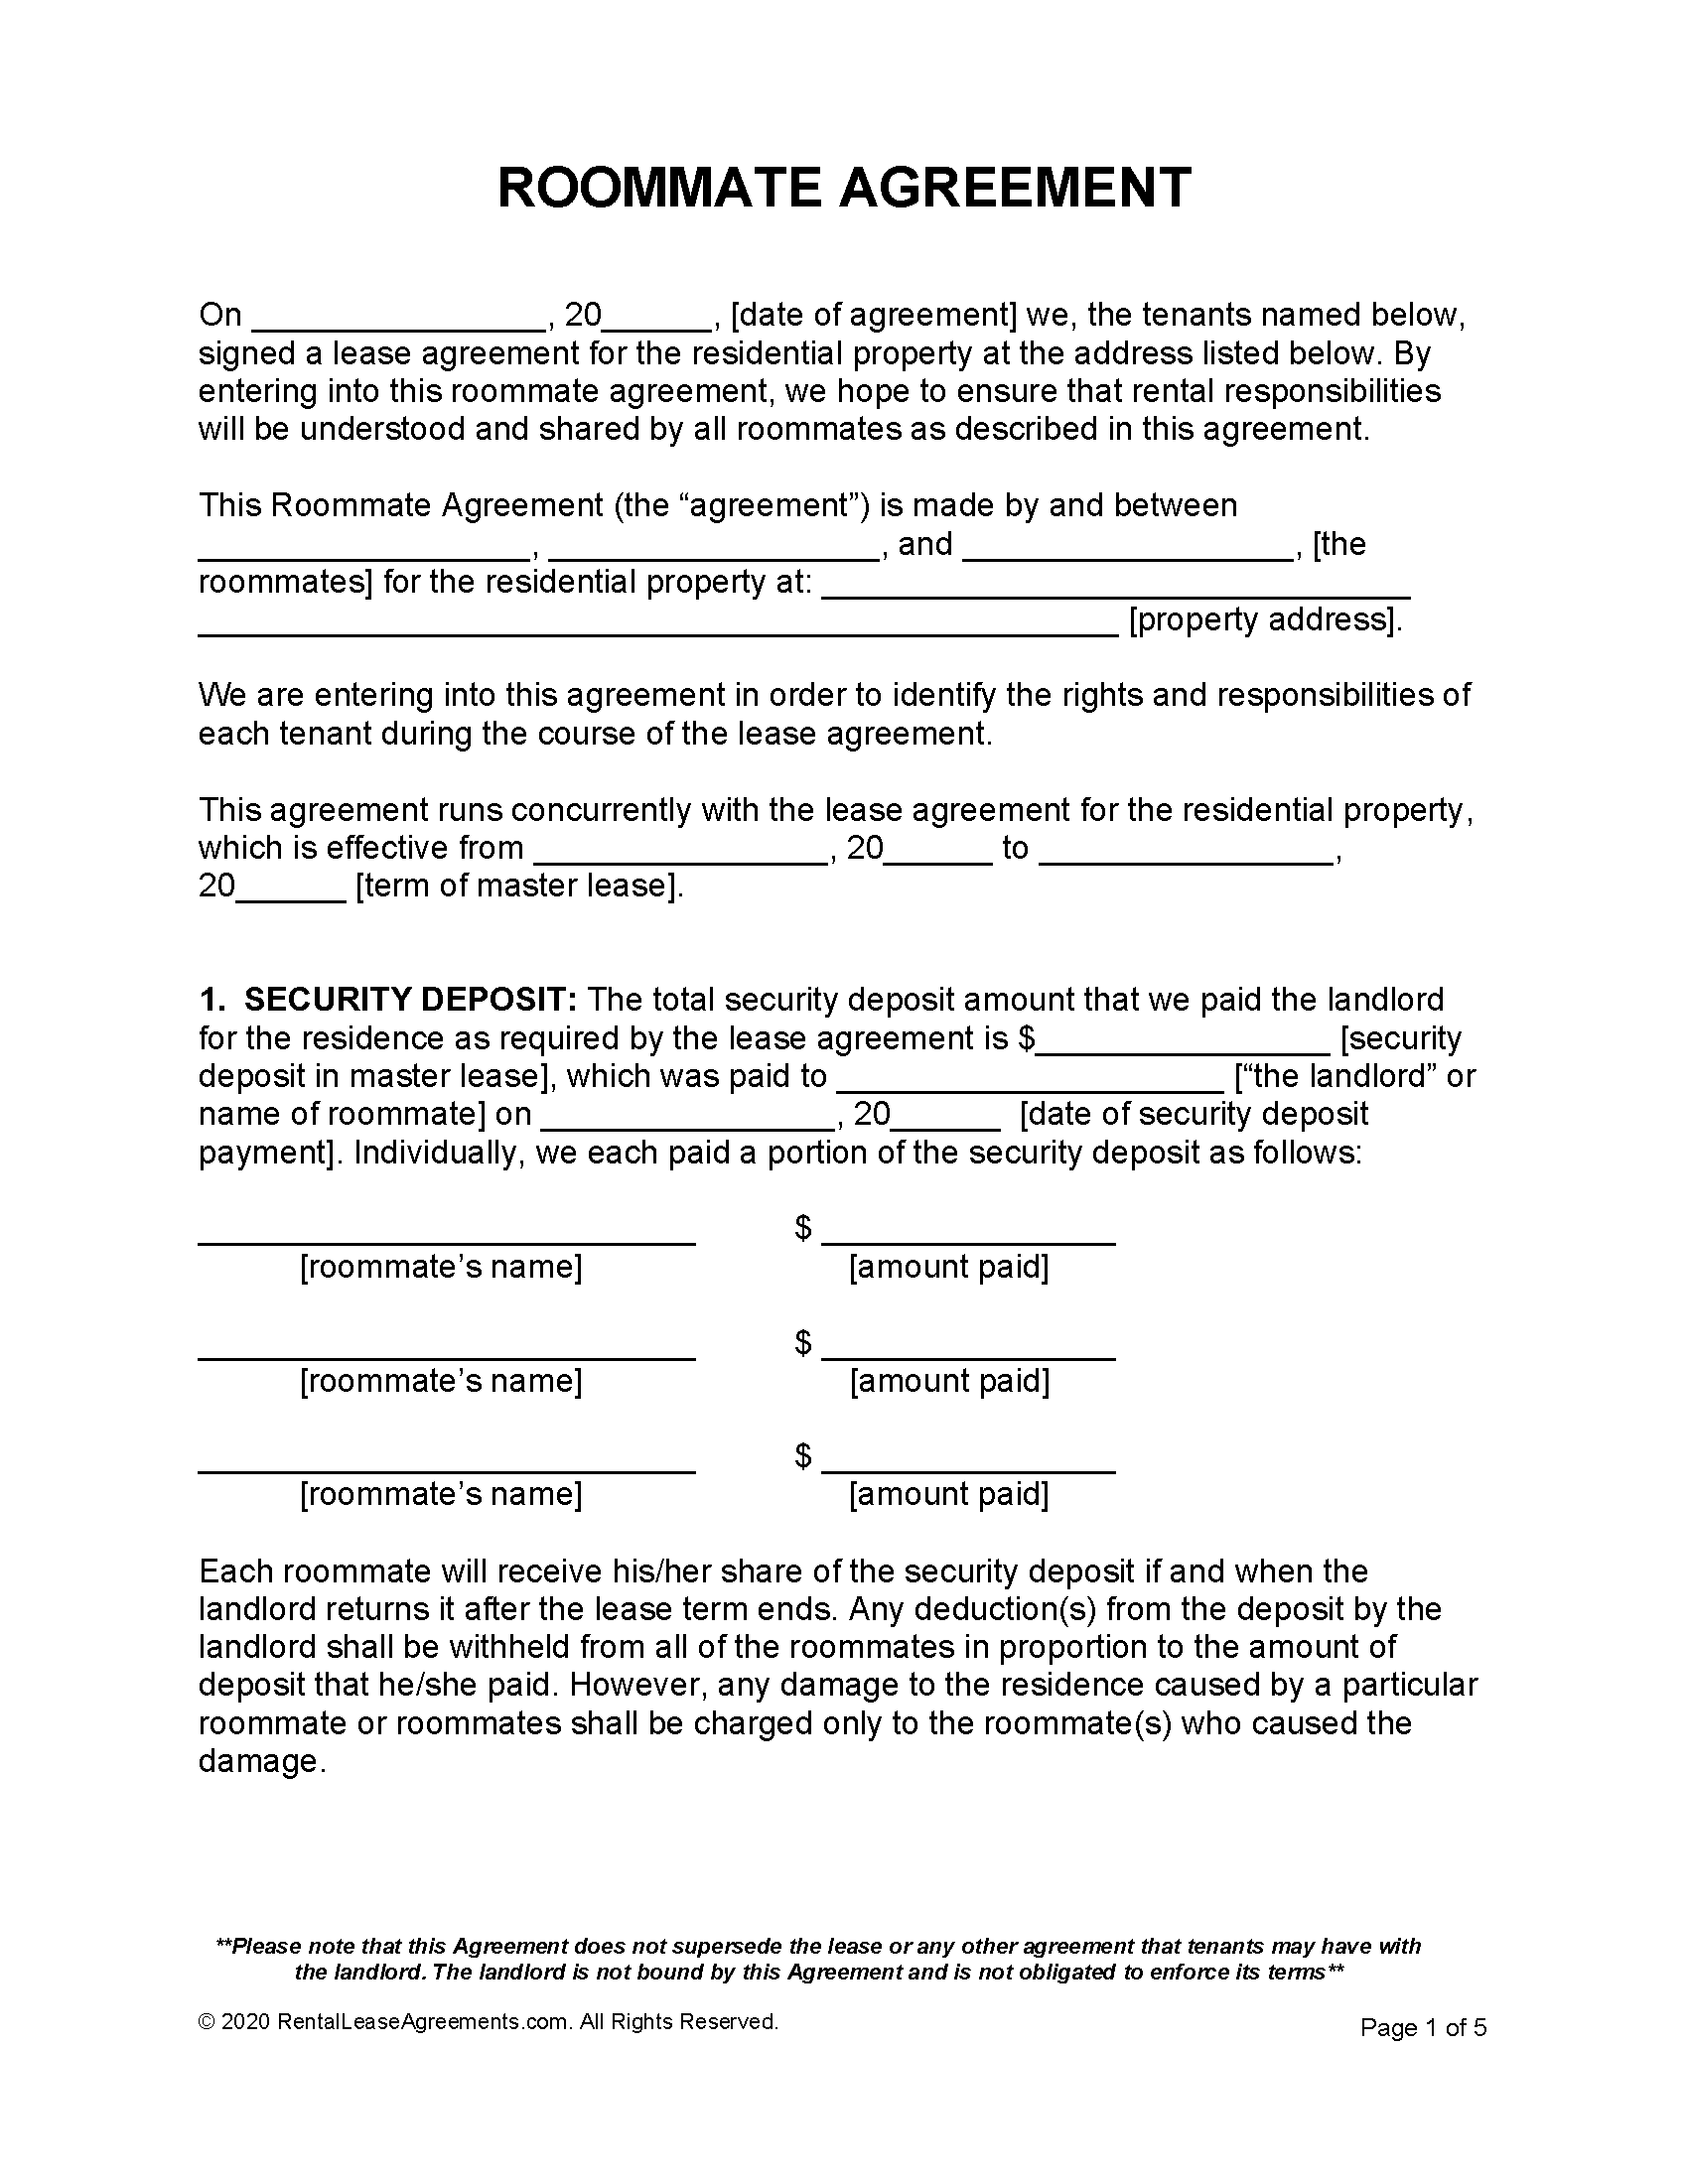 Free Roommate Agreement Template  PDF - Word In free roommate lease agreement template